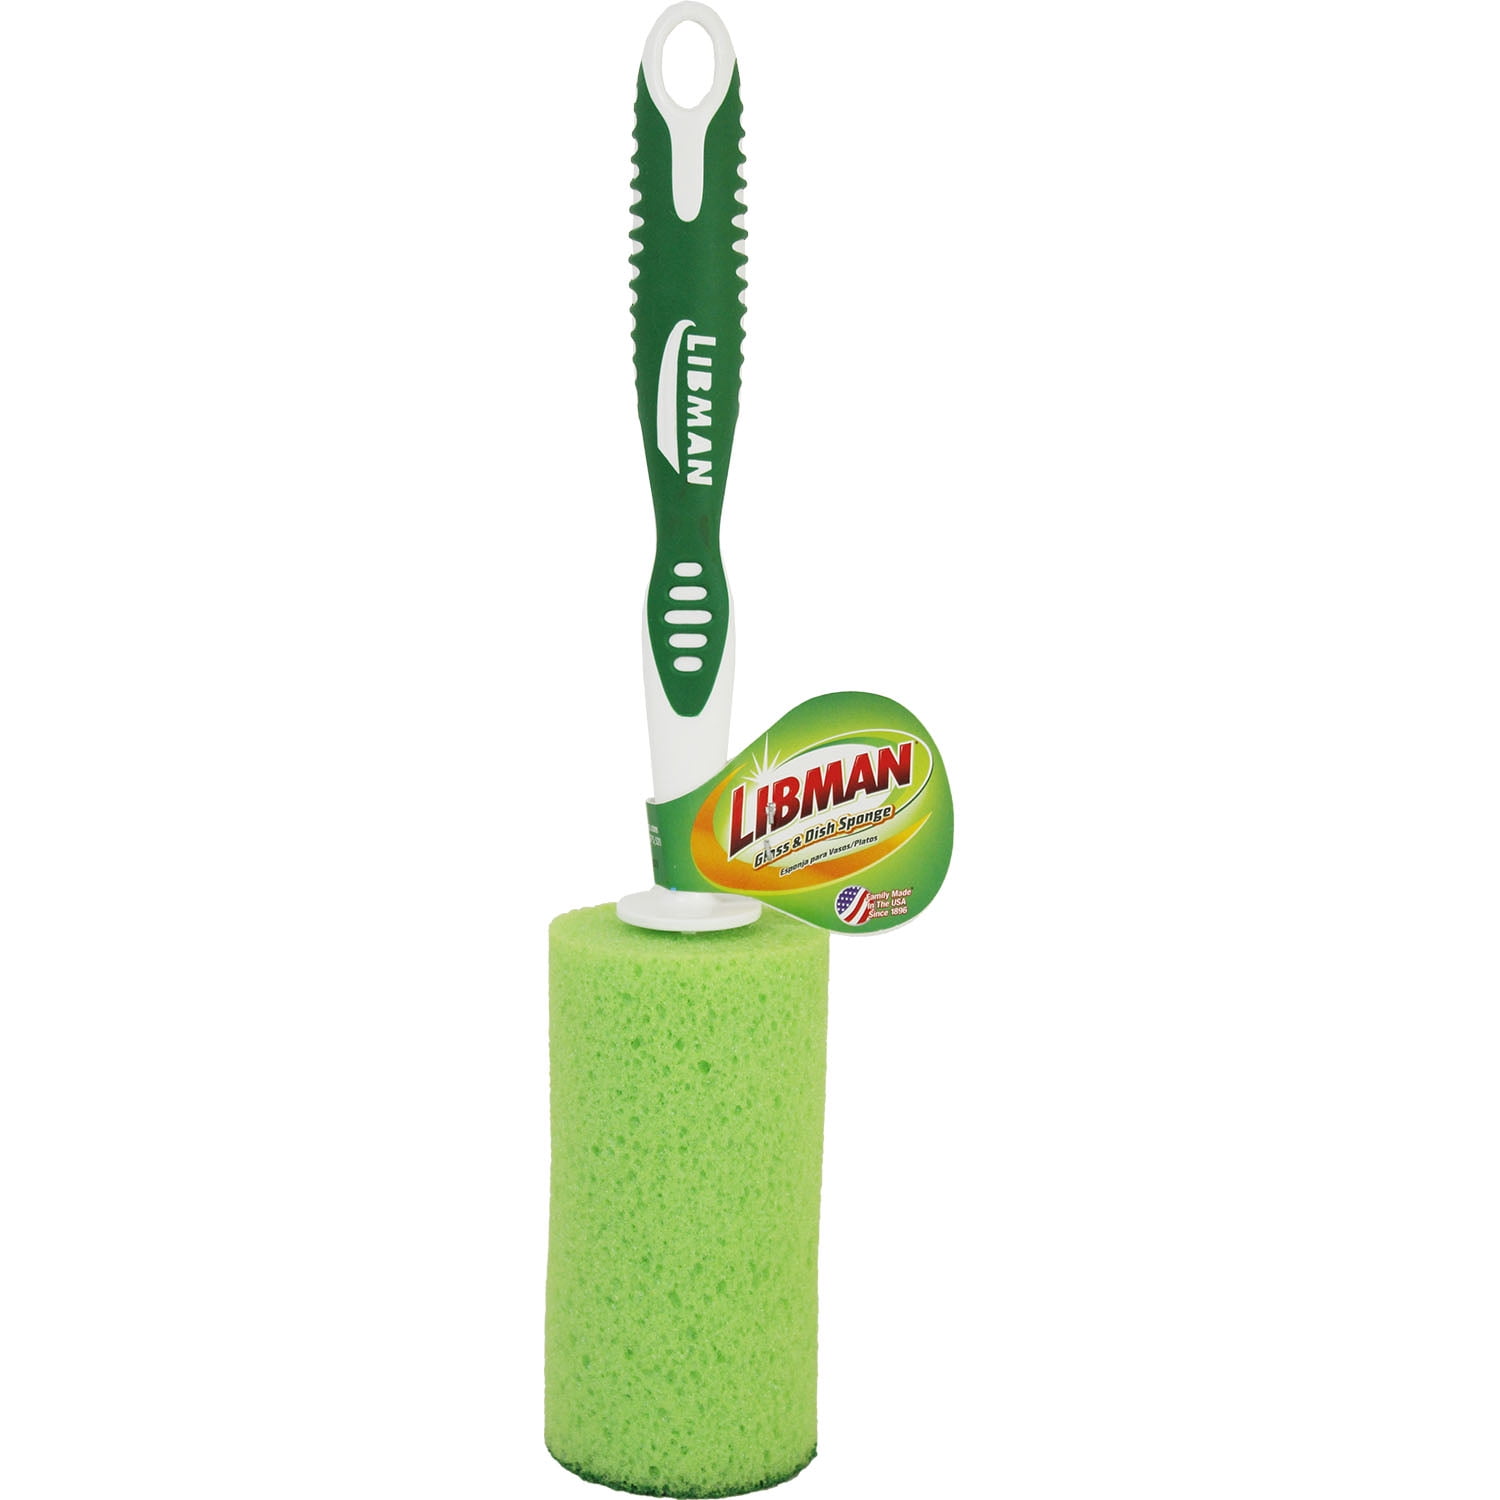 Libman Dish Sponge And Soap Dispenser, Cleaning Tools, Household